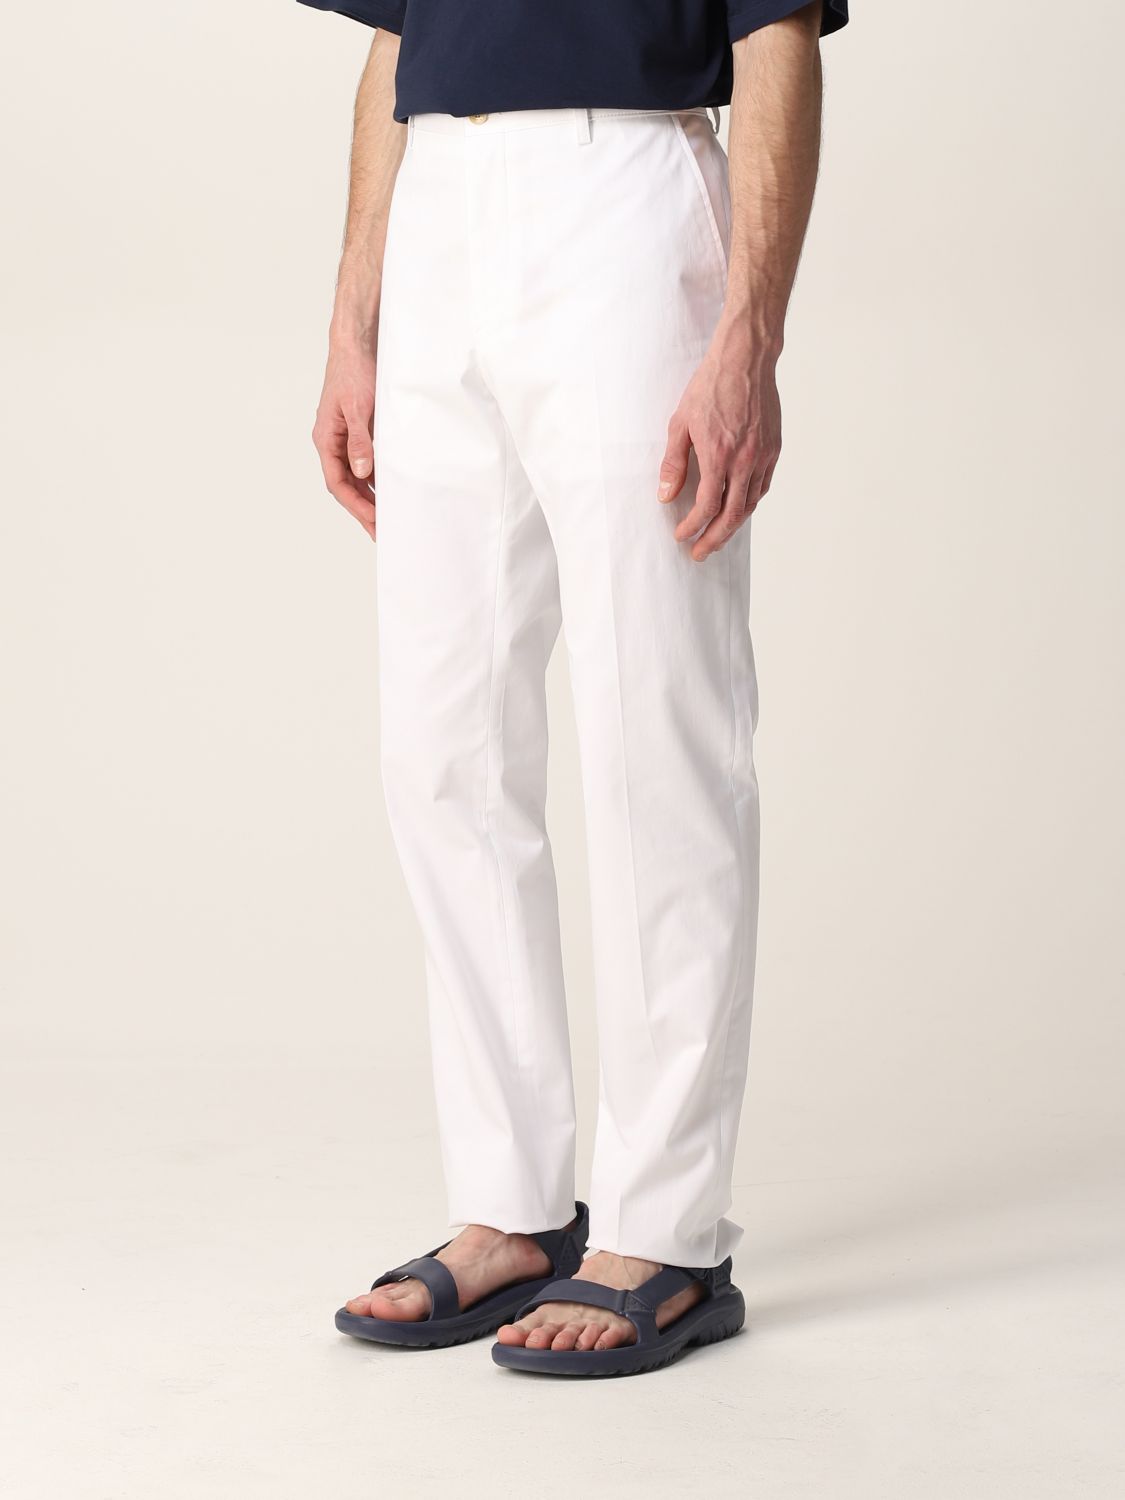 Etro classic pants with America pockets